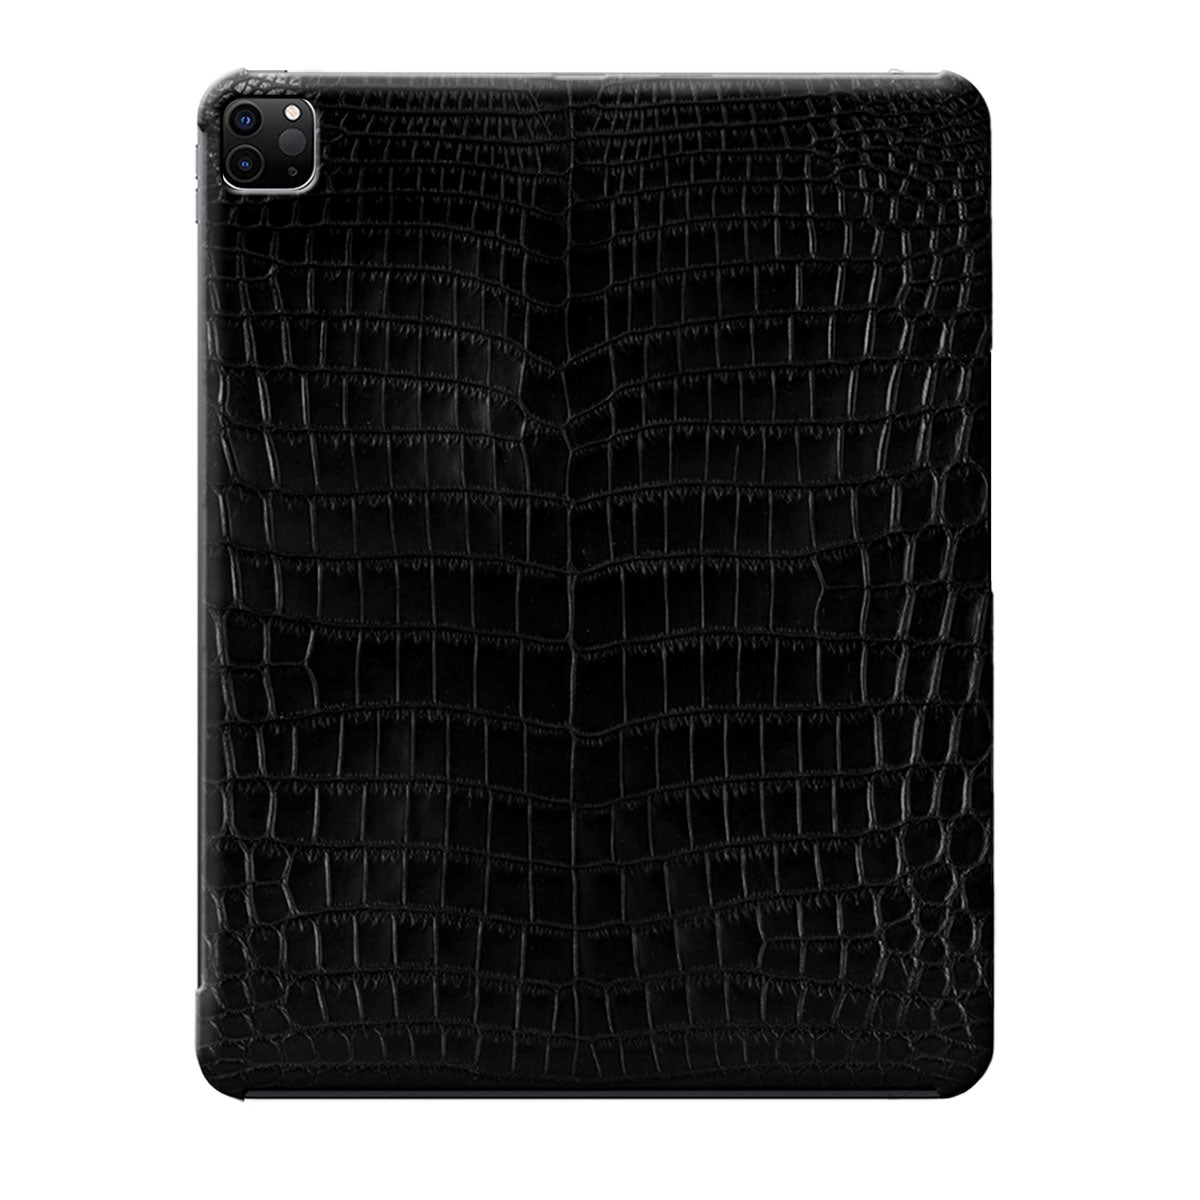 Leather iPad case / cover - iPad Pro 12.9 inches ( 1st to 6th generation ) - Genuine alligator